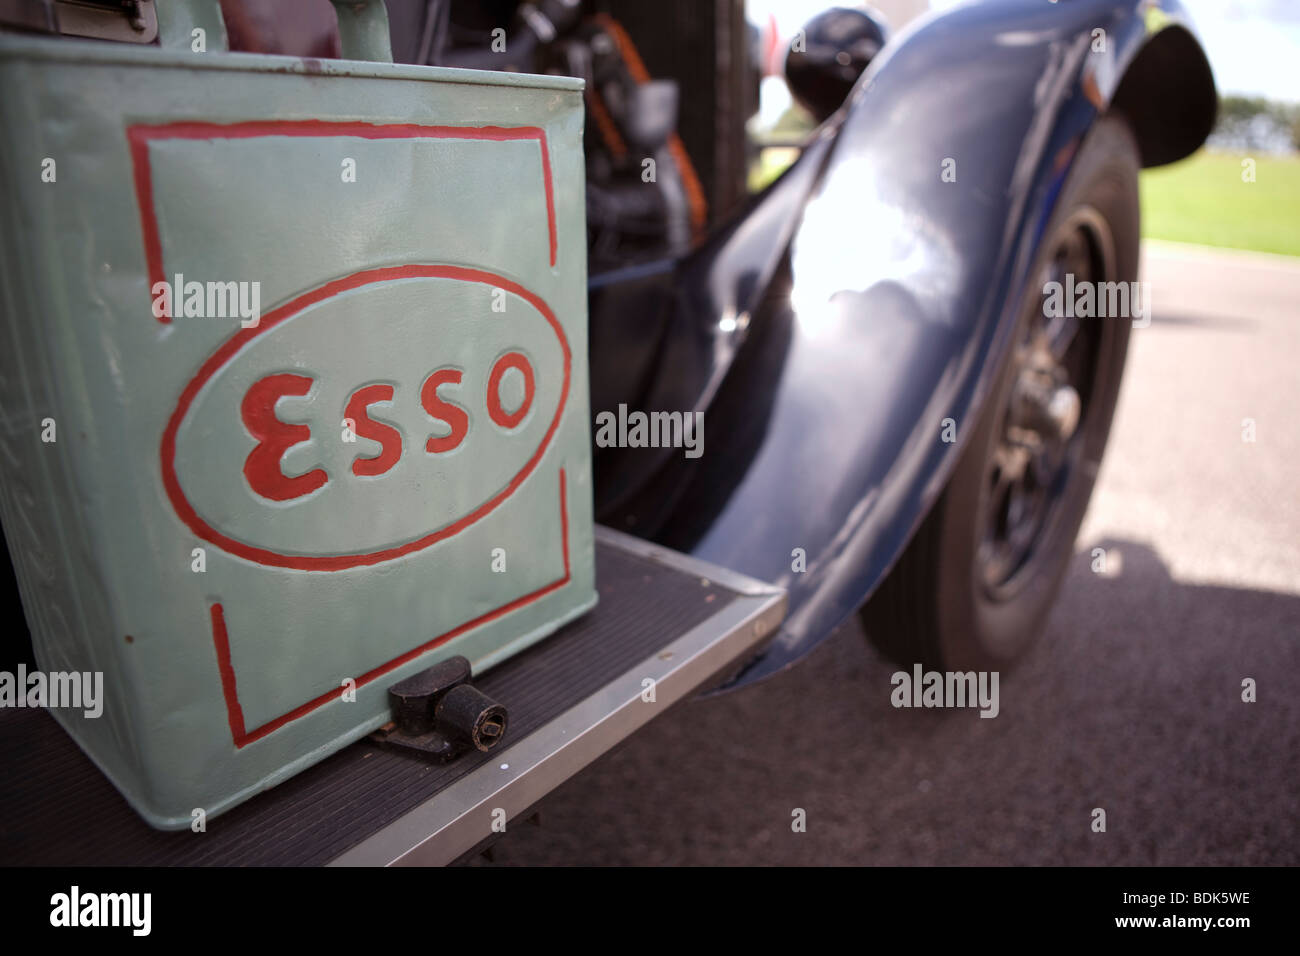 A car at goodwood in sussex. Stock Photo